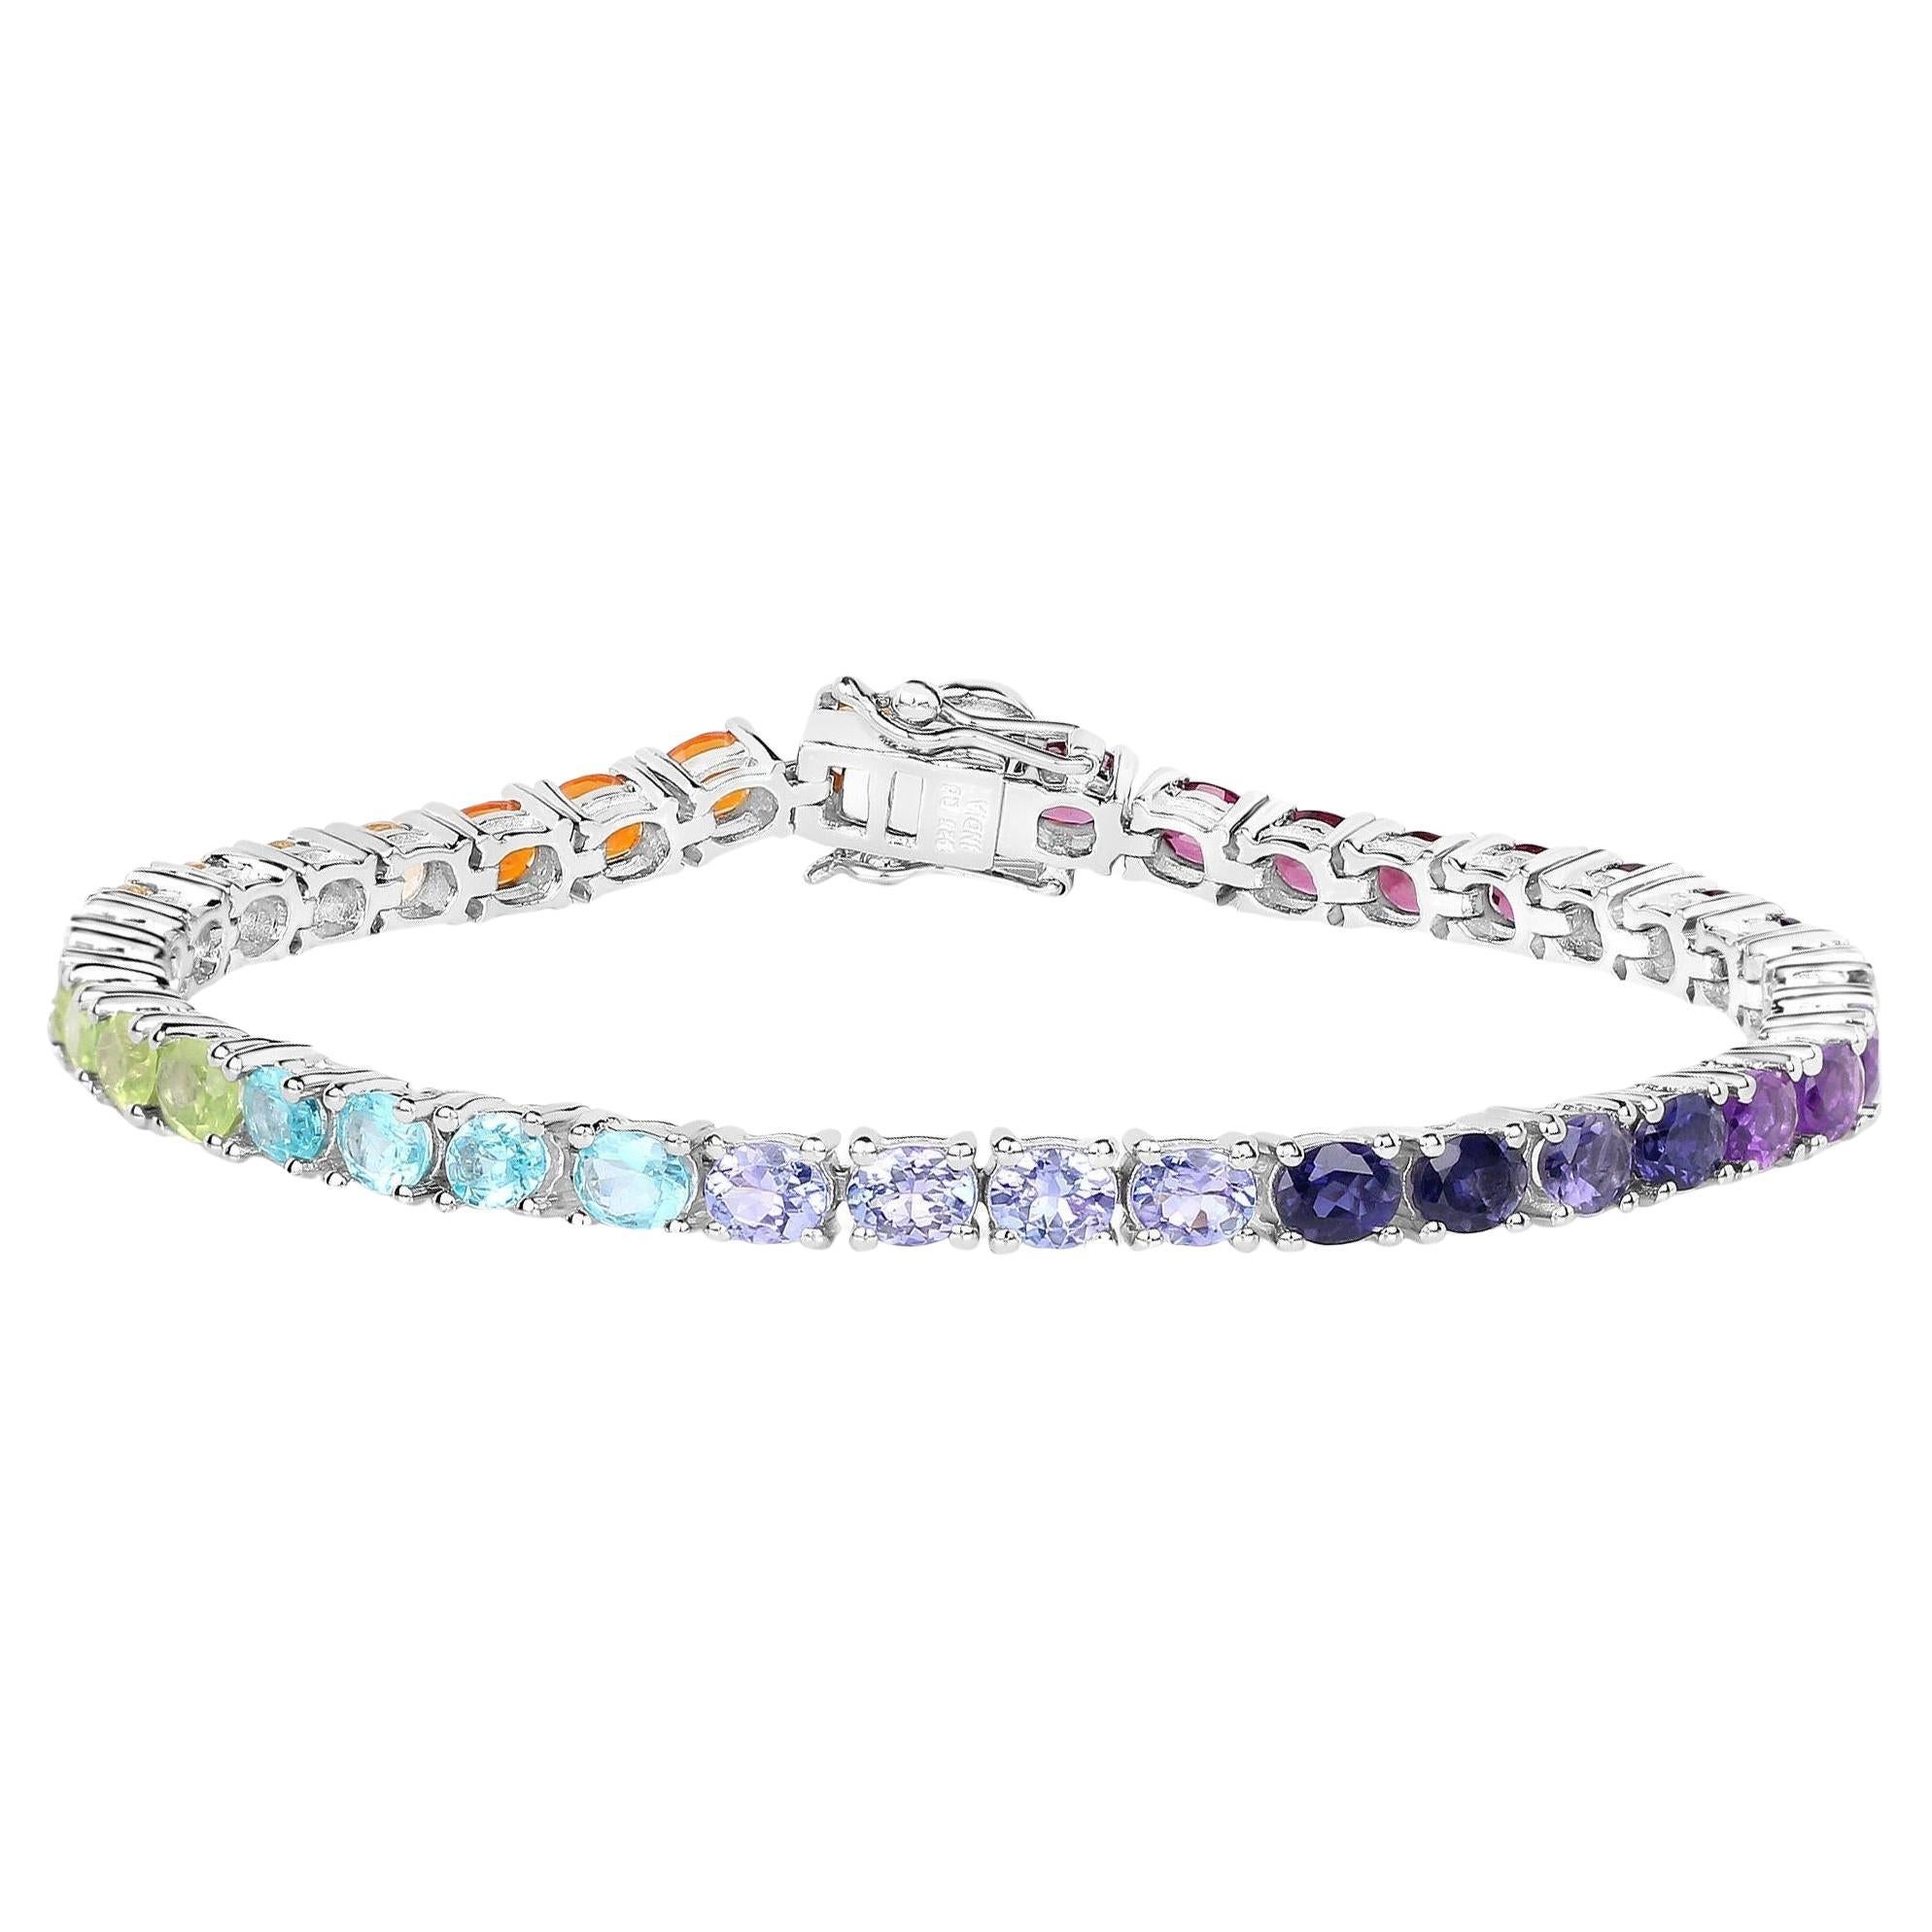 It comes with the appraisal by GIA GG/AJP
Natural Stones: Amethyst, Peridot, Citrine, Tanzanite, Garnet, Rhodolite Garnet, Apatite, Opal
Number Of Stones: 35
Cut = Oval
Metal: Sterling Silver
Rhodium Plated
Bracelet Size: 7  Inches